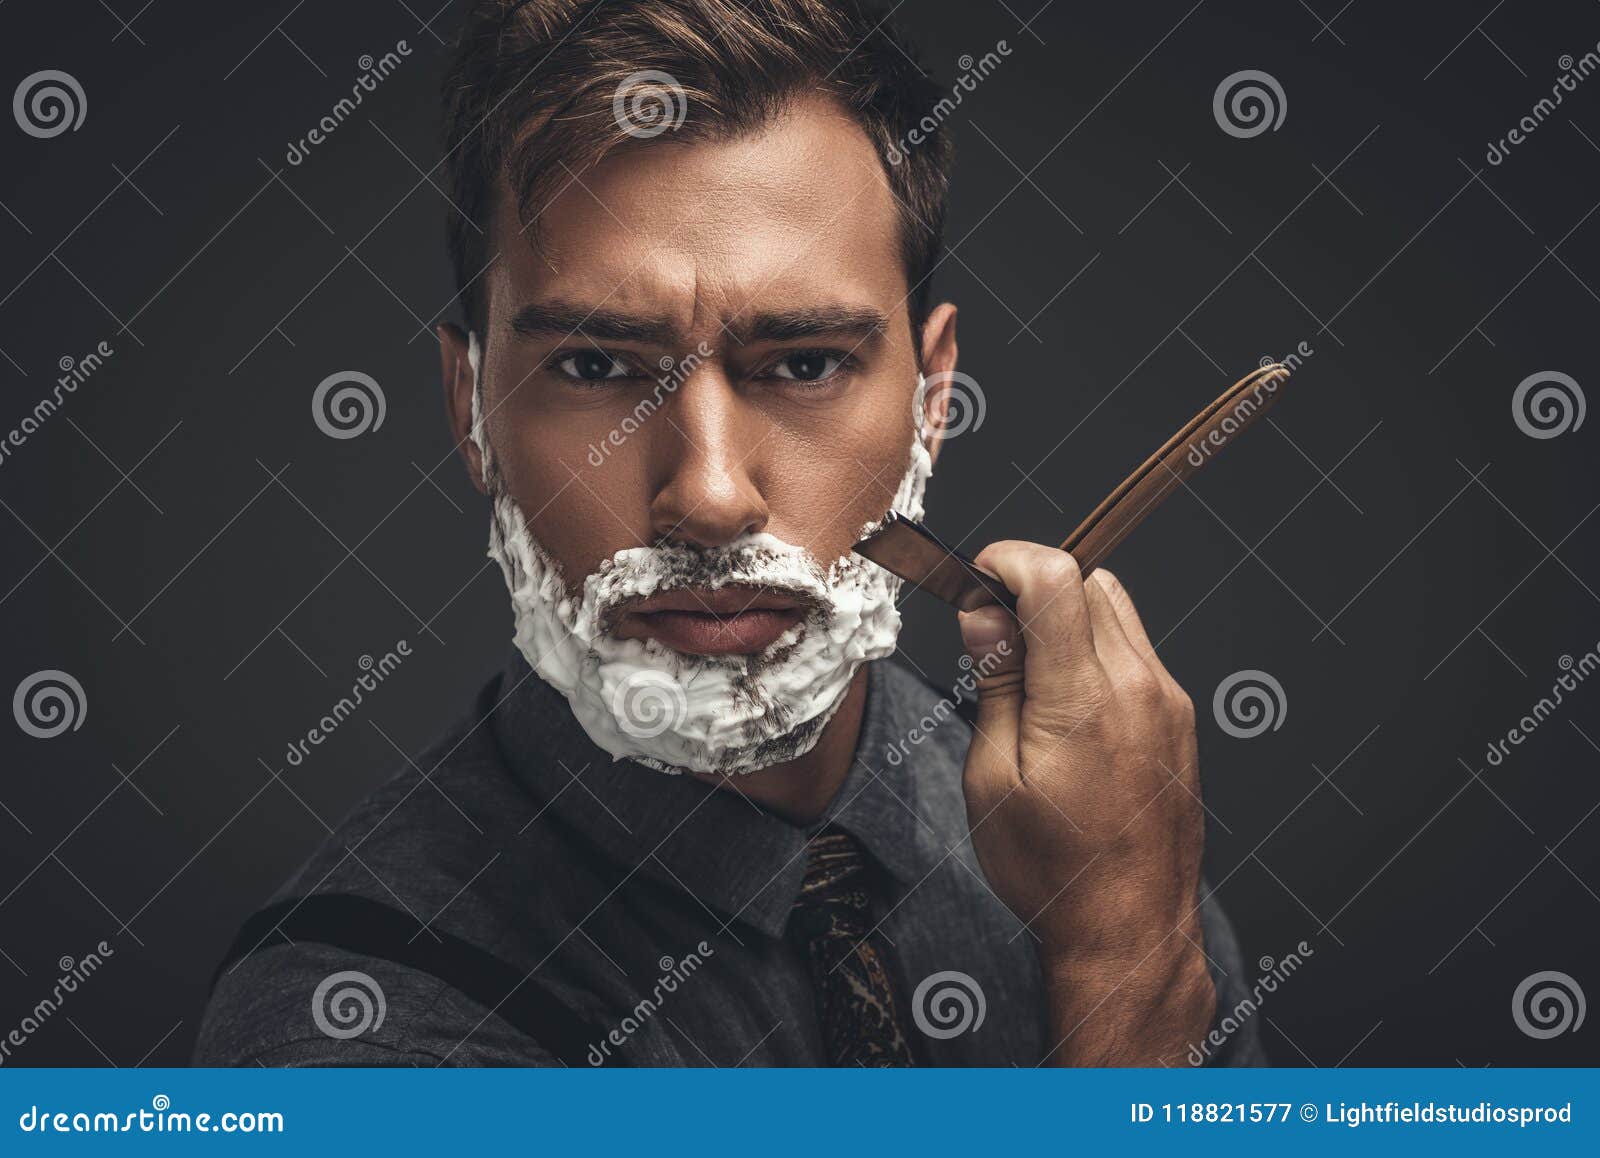 young handsome man with shaving cream on his face, grooming his beard with straight razor and looking